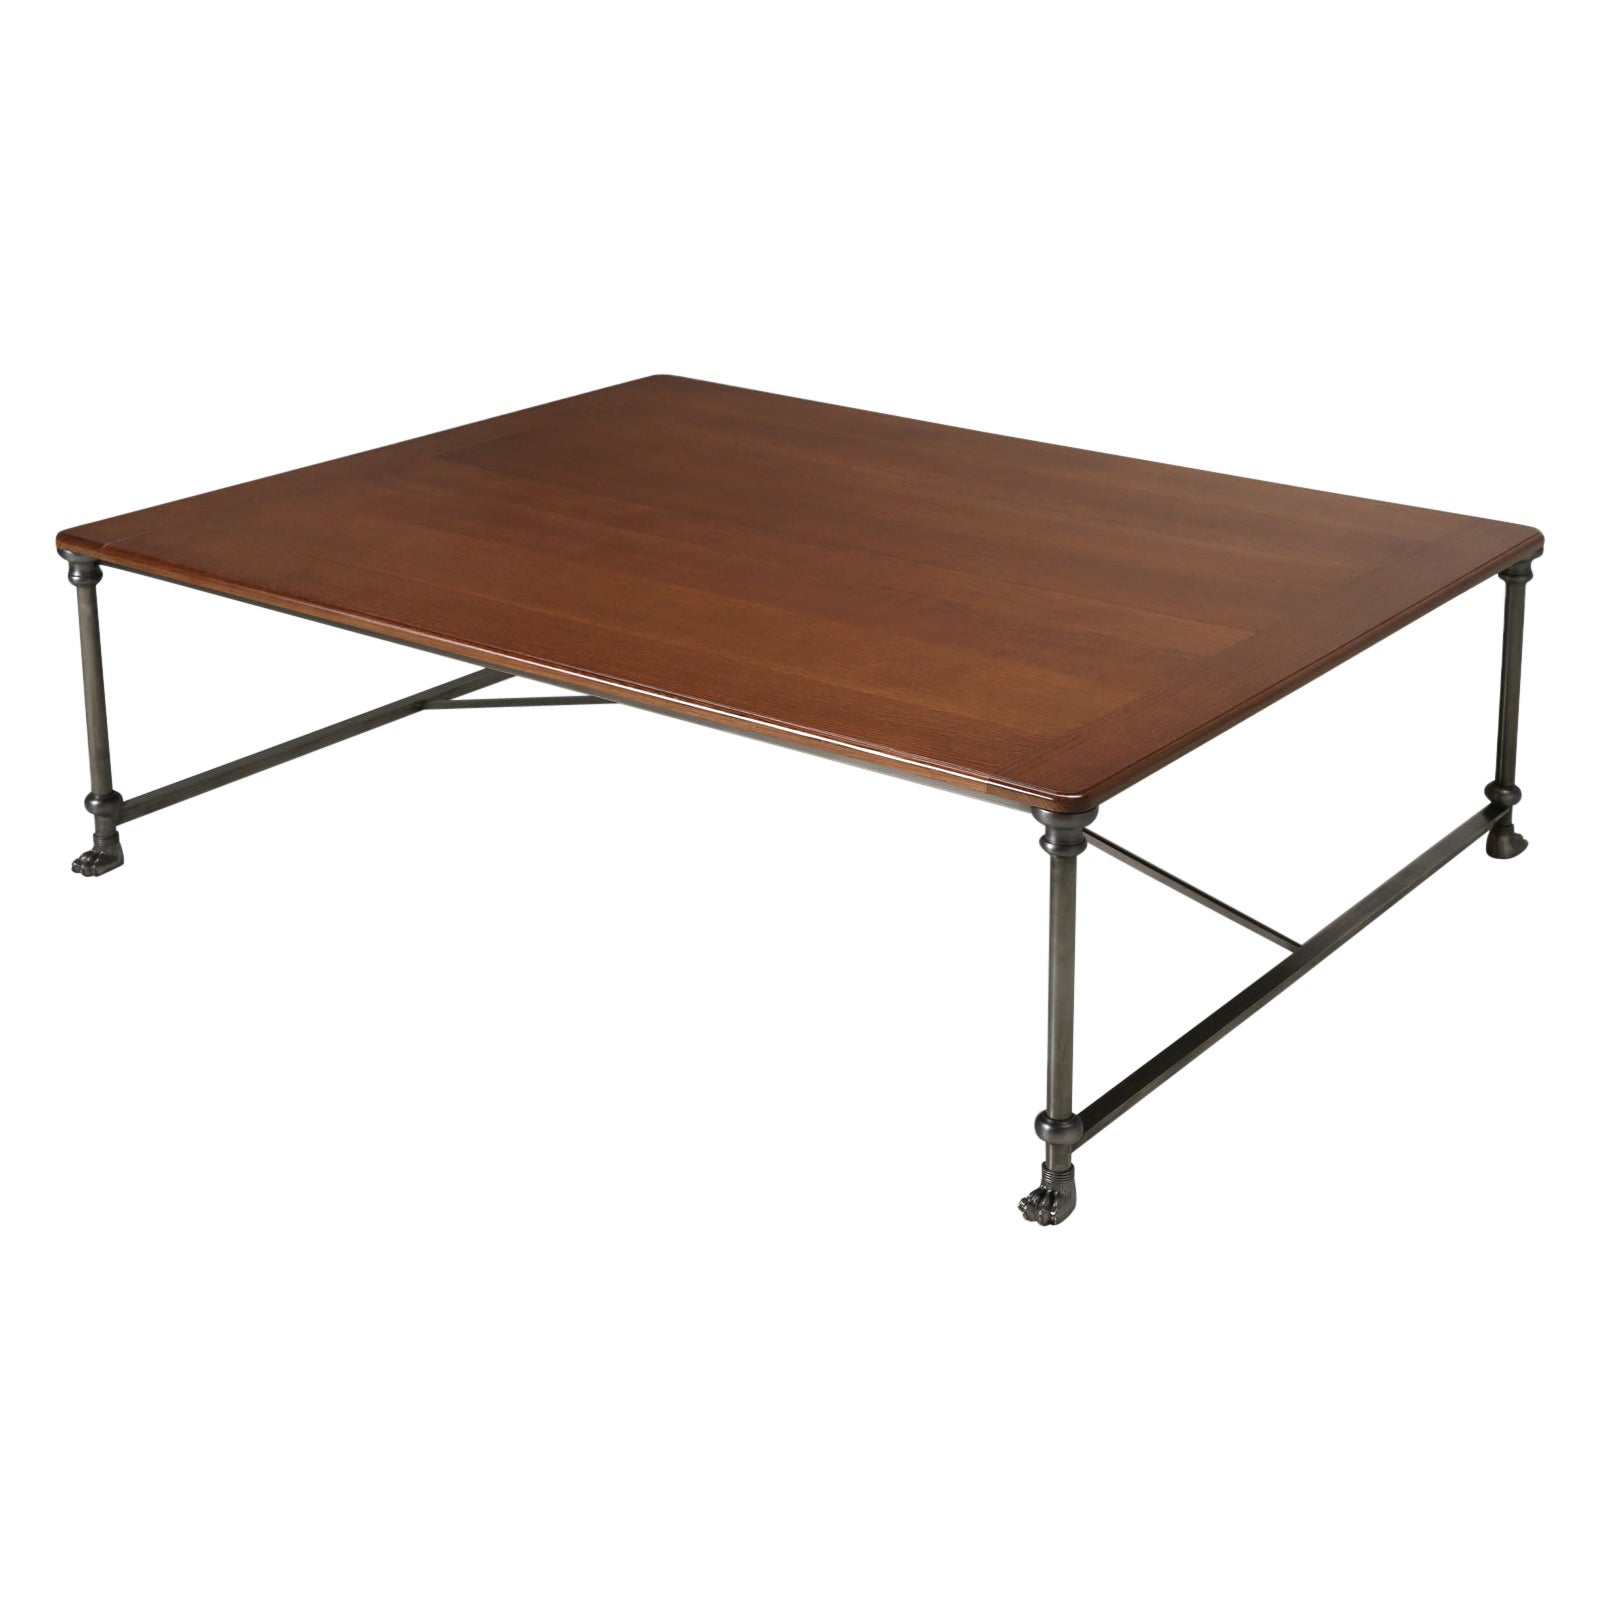 French Industrial Inspired Coffee Table in Stainless Steel Any Dimension, Finish